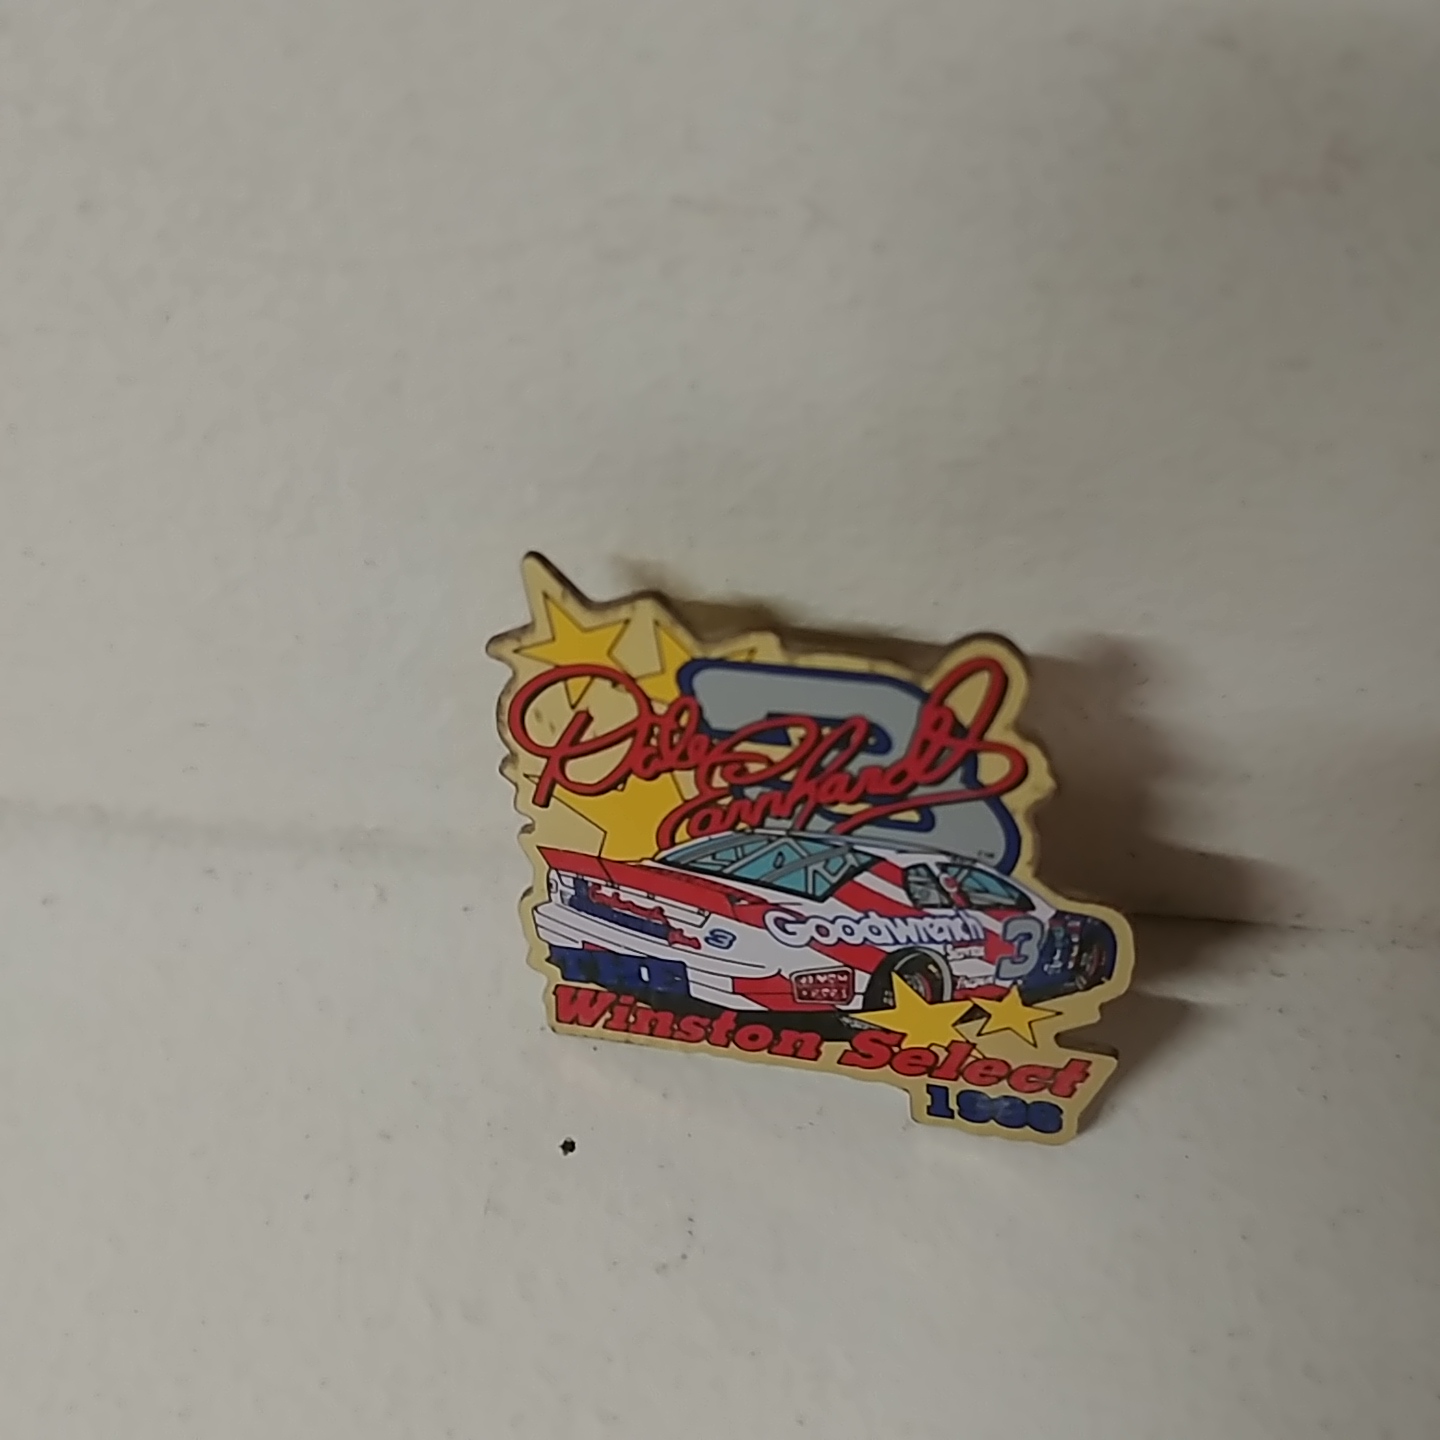 1996 Dale Earnhardt GMGW "Olympics" hatpin